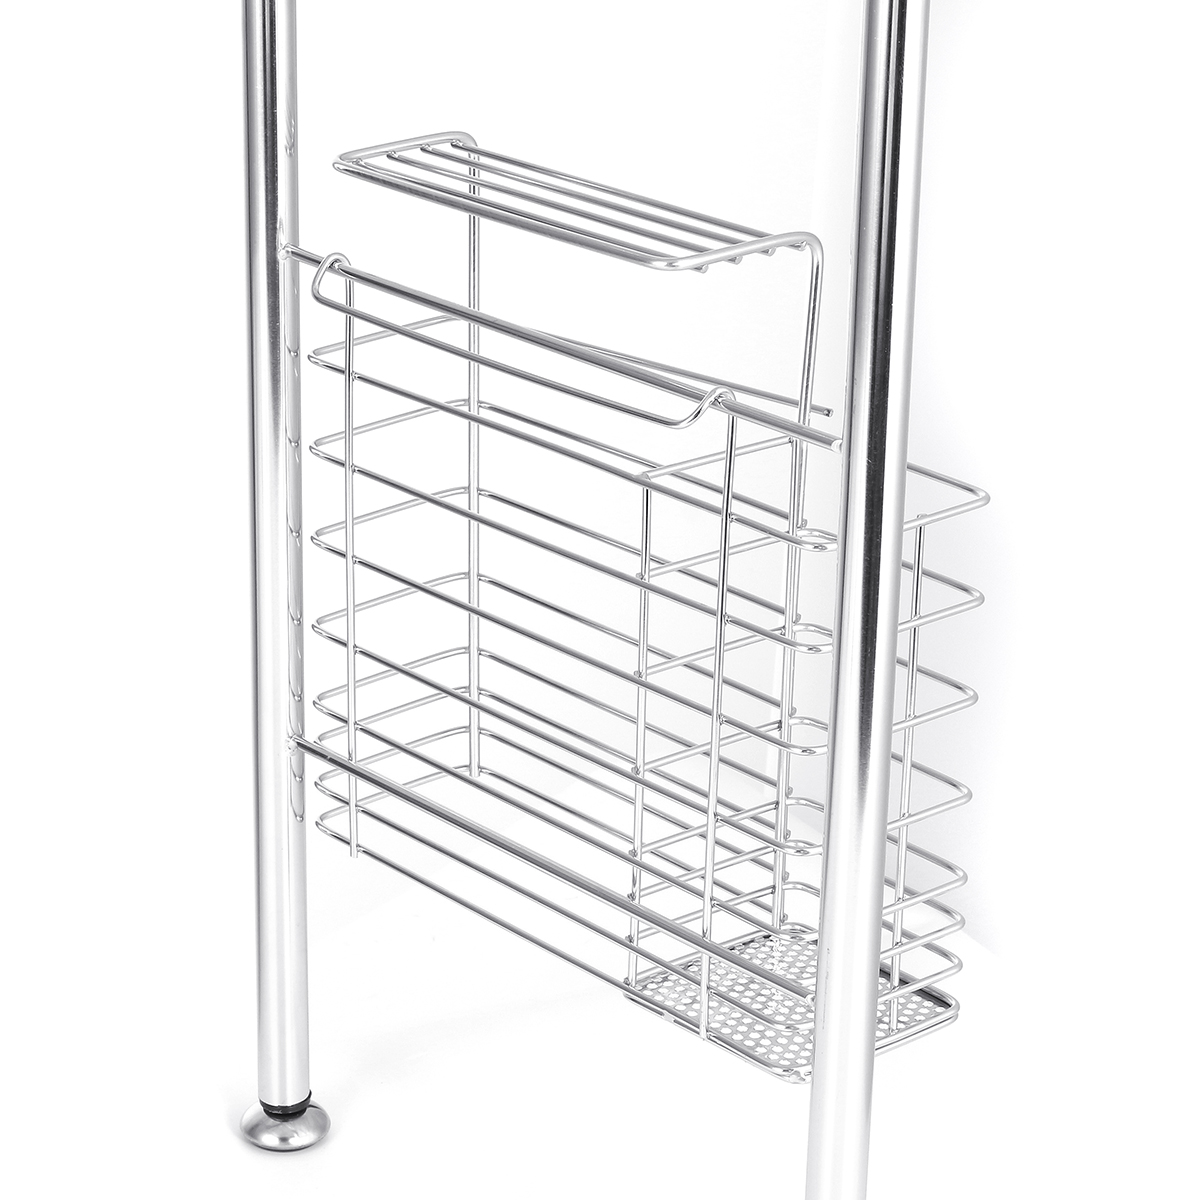 647484cm-Double-Layer-Stainless-Steel-Rack-Shelf-Storage-for-Kitchen-Dishes-Arrangement-1671407-9